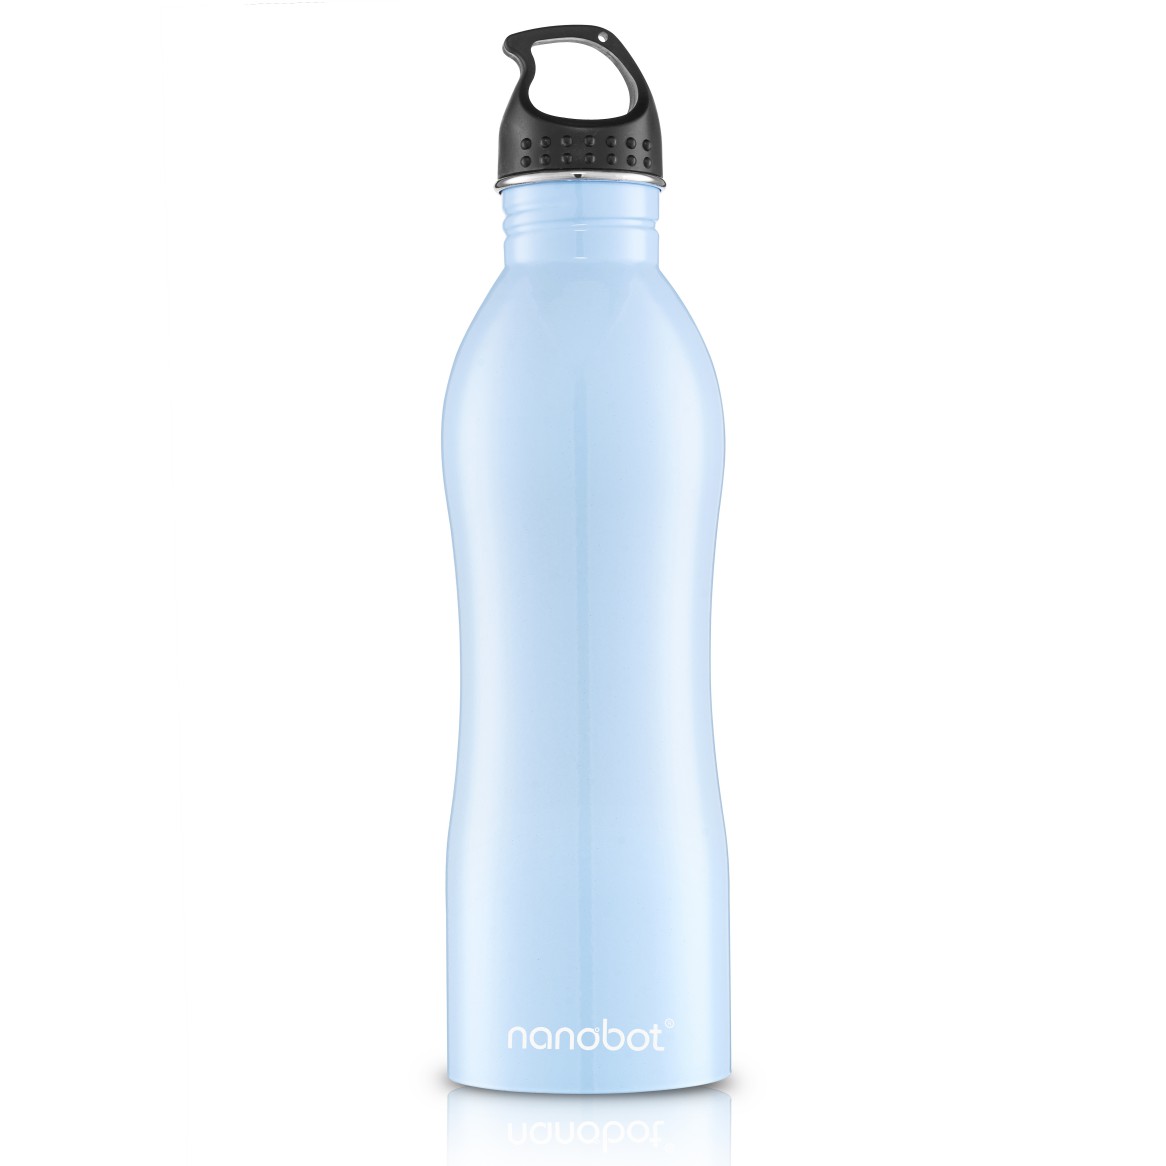 The Perks of a Stainless Steel Sports Water Bottle- Sports bottle- Stainless Steel Water Bottles- Nanobot - Sky blue Color Bottle